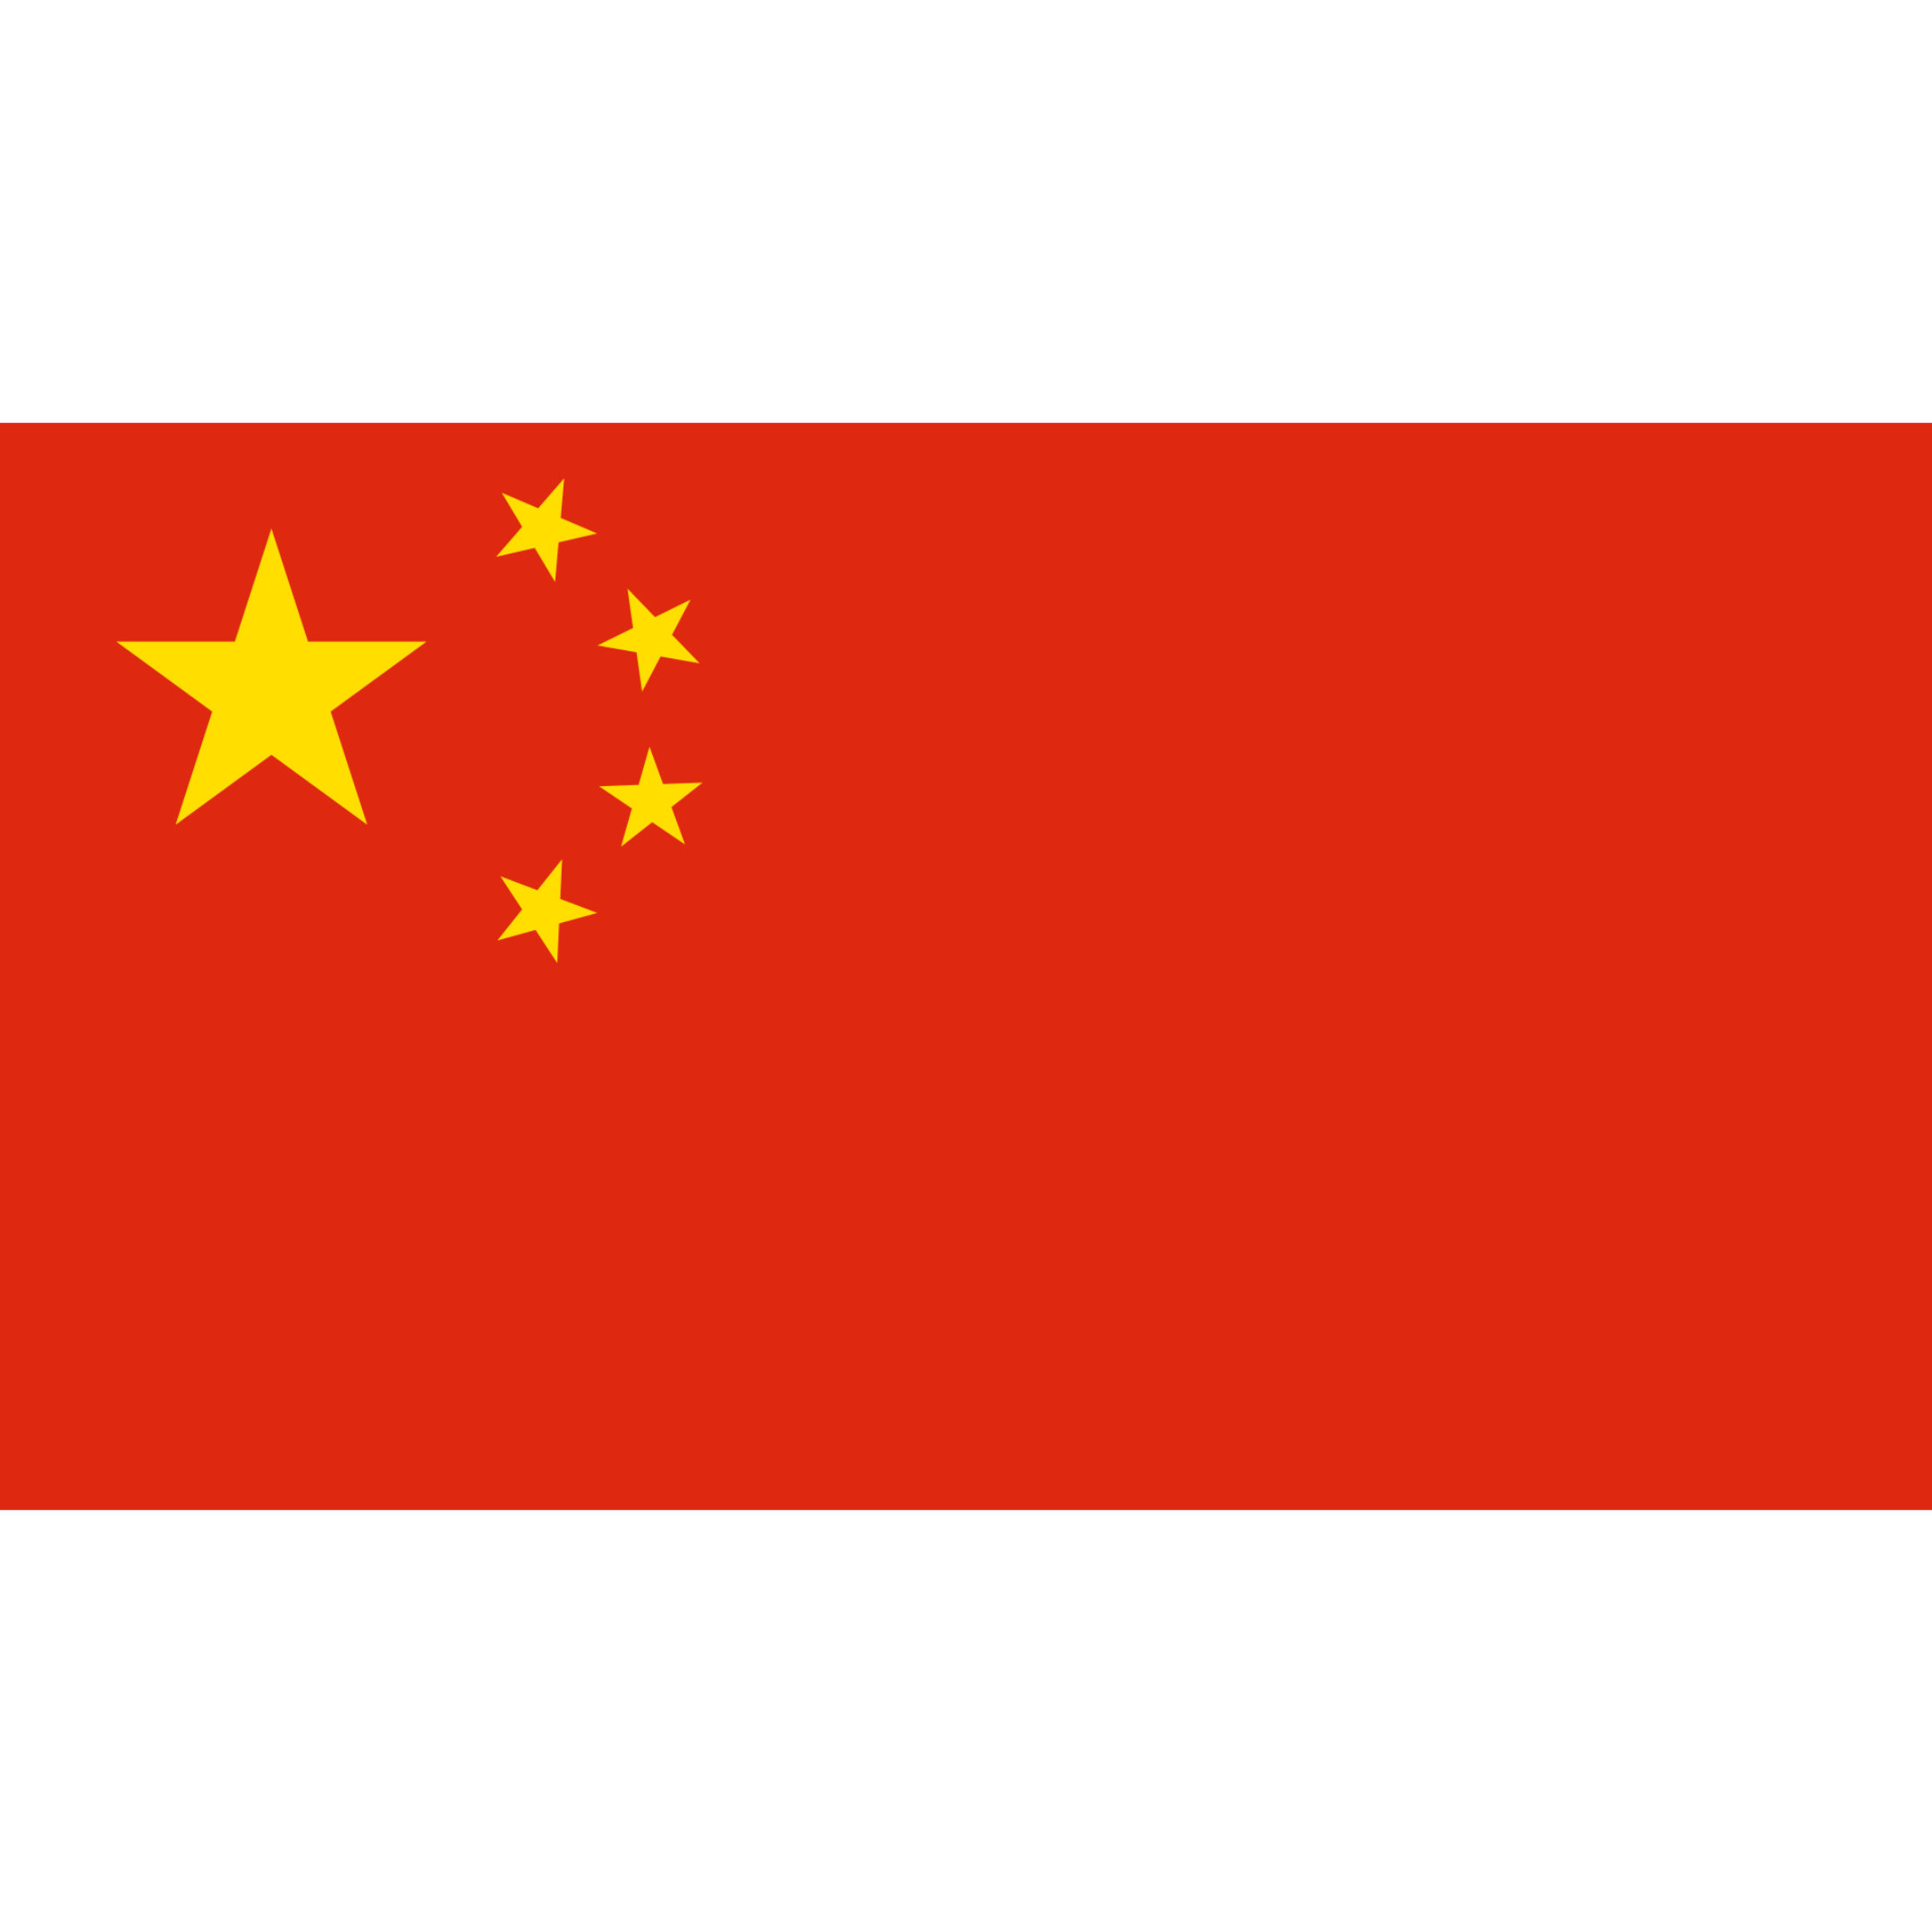 China's flag has a red background with 5 golden stars in the top left corner, one large one and four small stars in an arc.